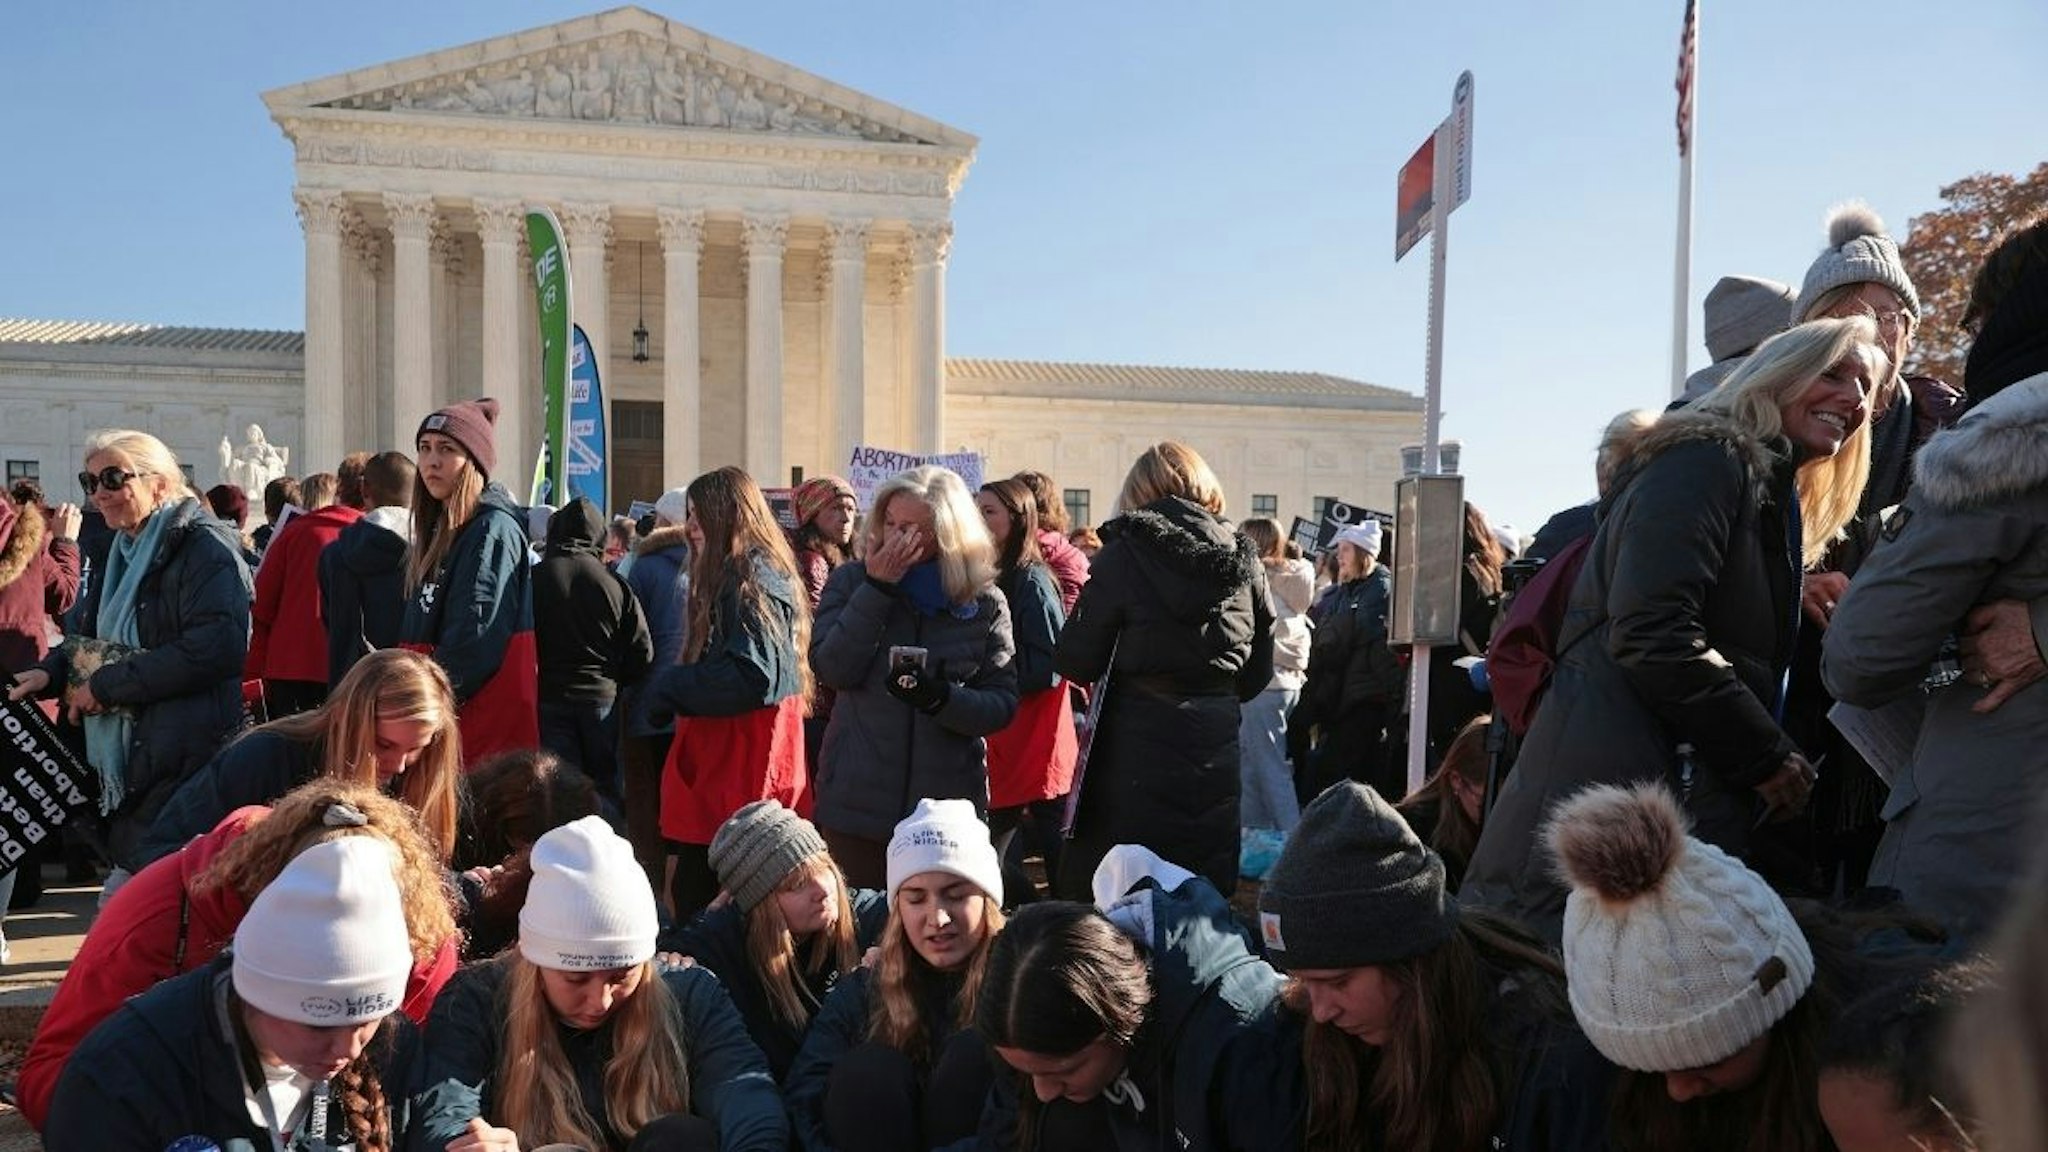 Students from Liberty University sit and pray in front of the U.S. Supreme Court as the justices hear hear arguments in Dobbs v. Jackson Women's Health, a case about a Mississippi law that bans most abortions after 15 weeks, on December 01, 2021 in Washington, DC.